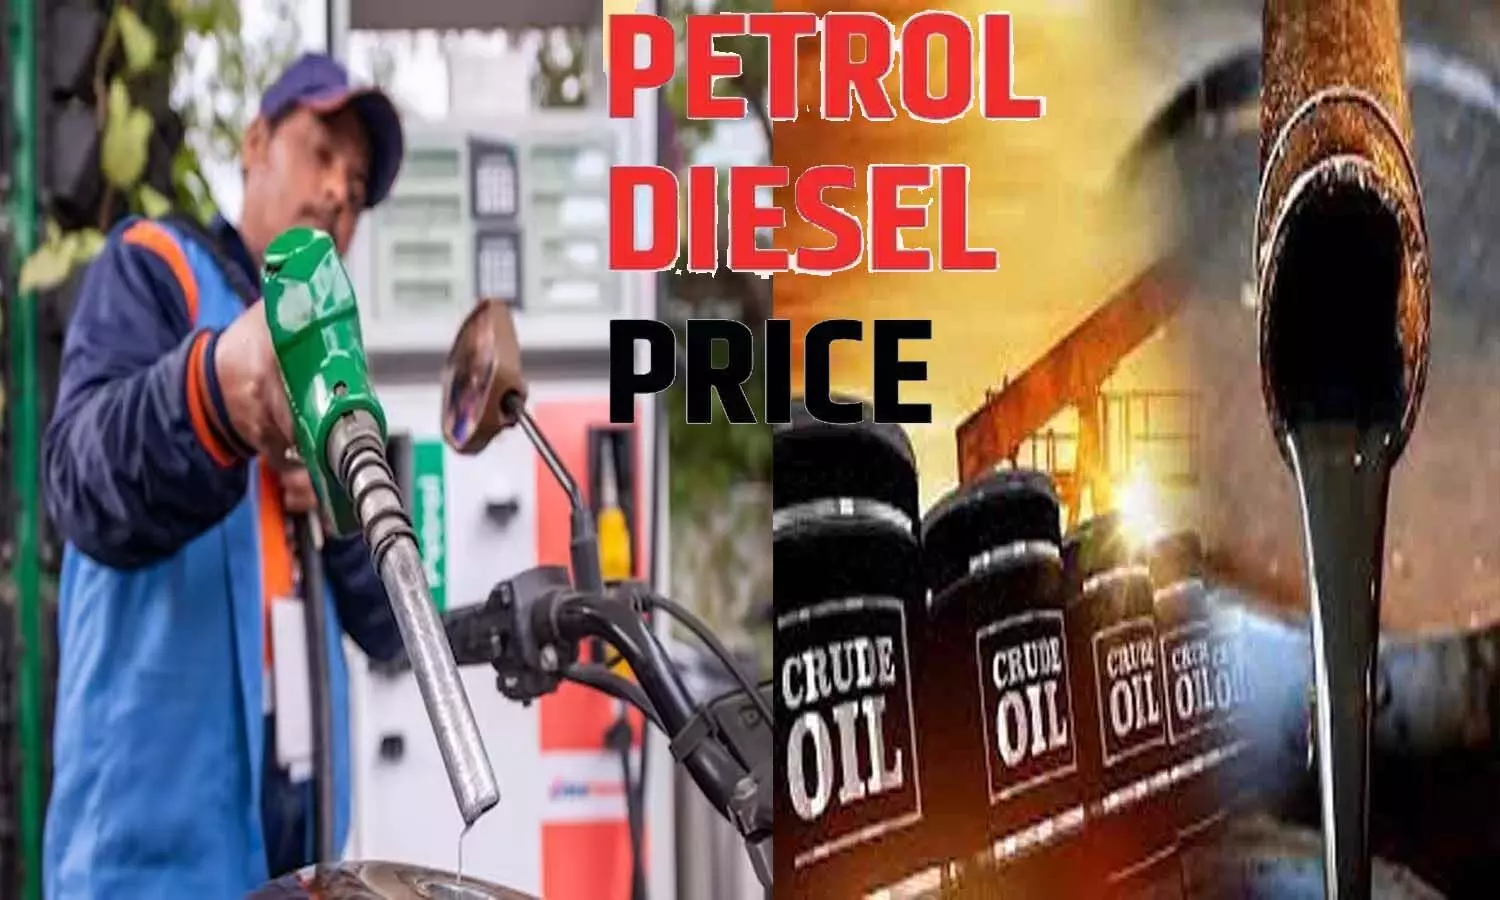 Huge rise in crude oil prices, know what was the effect on petrol and diesel